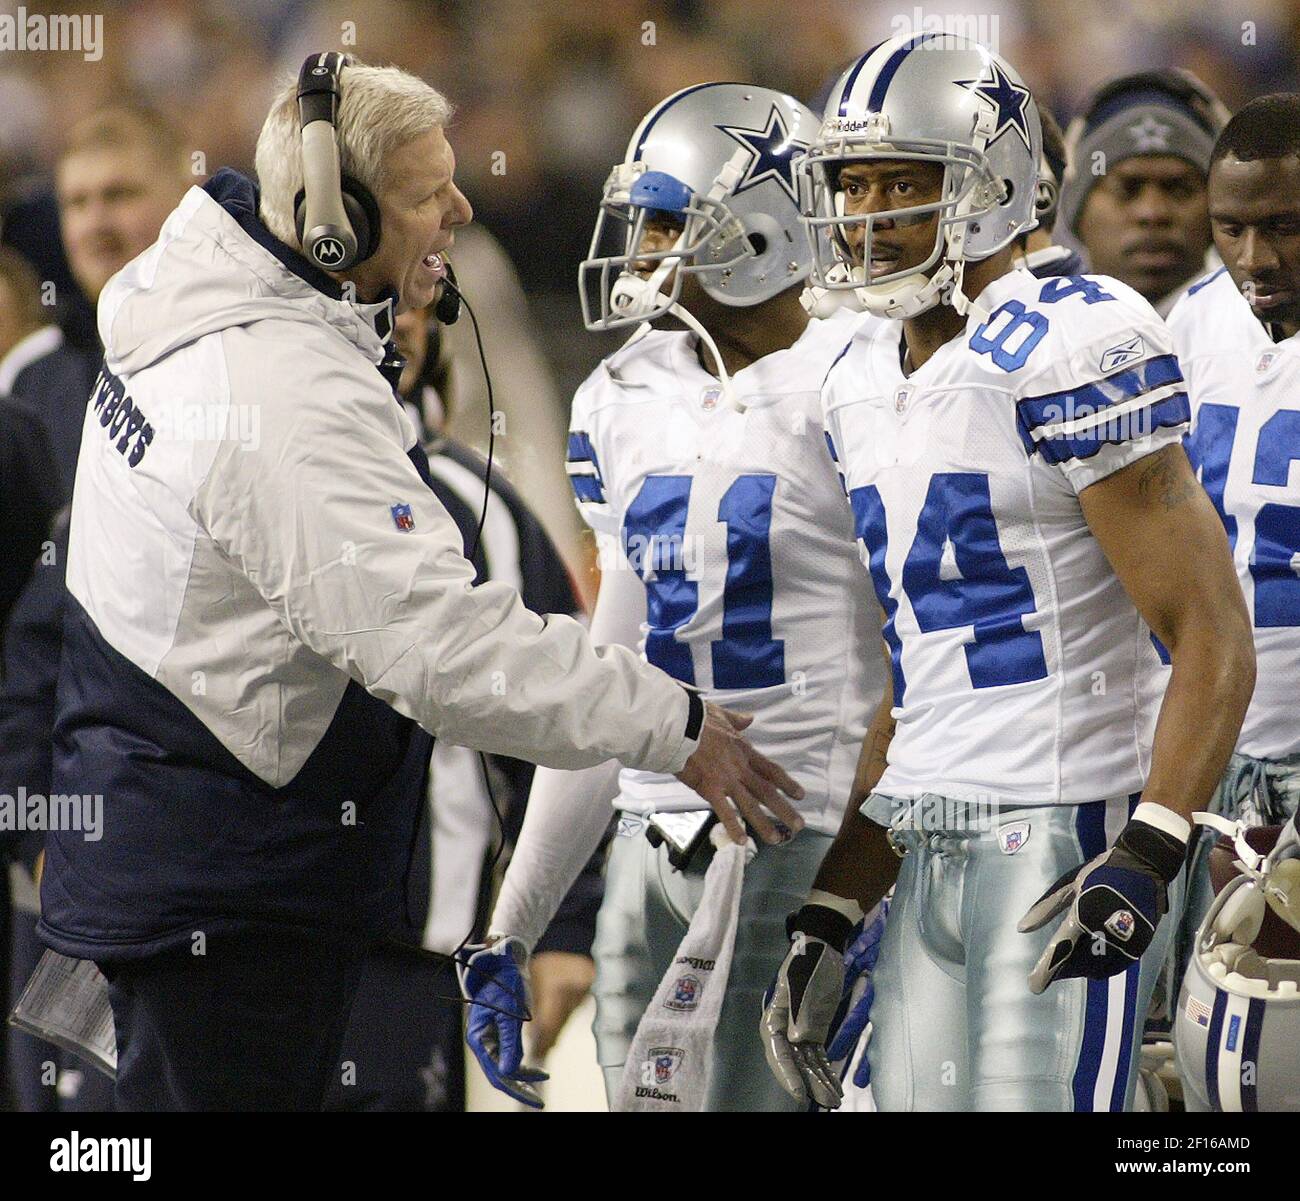 Dallas Cowboys head coach Bill Parcells yells at wide receiver Patrick Crayton (84) on the sidelines during the NFC Wild Card game at Qwest Field in Seattle, Washington, Saturday, January 6, 2007. (Photo by Ron Jenkins/Fort Worth Star-Telegram/MCT/Sipa USA) Stock Photo